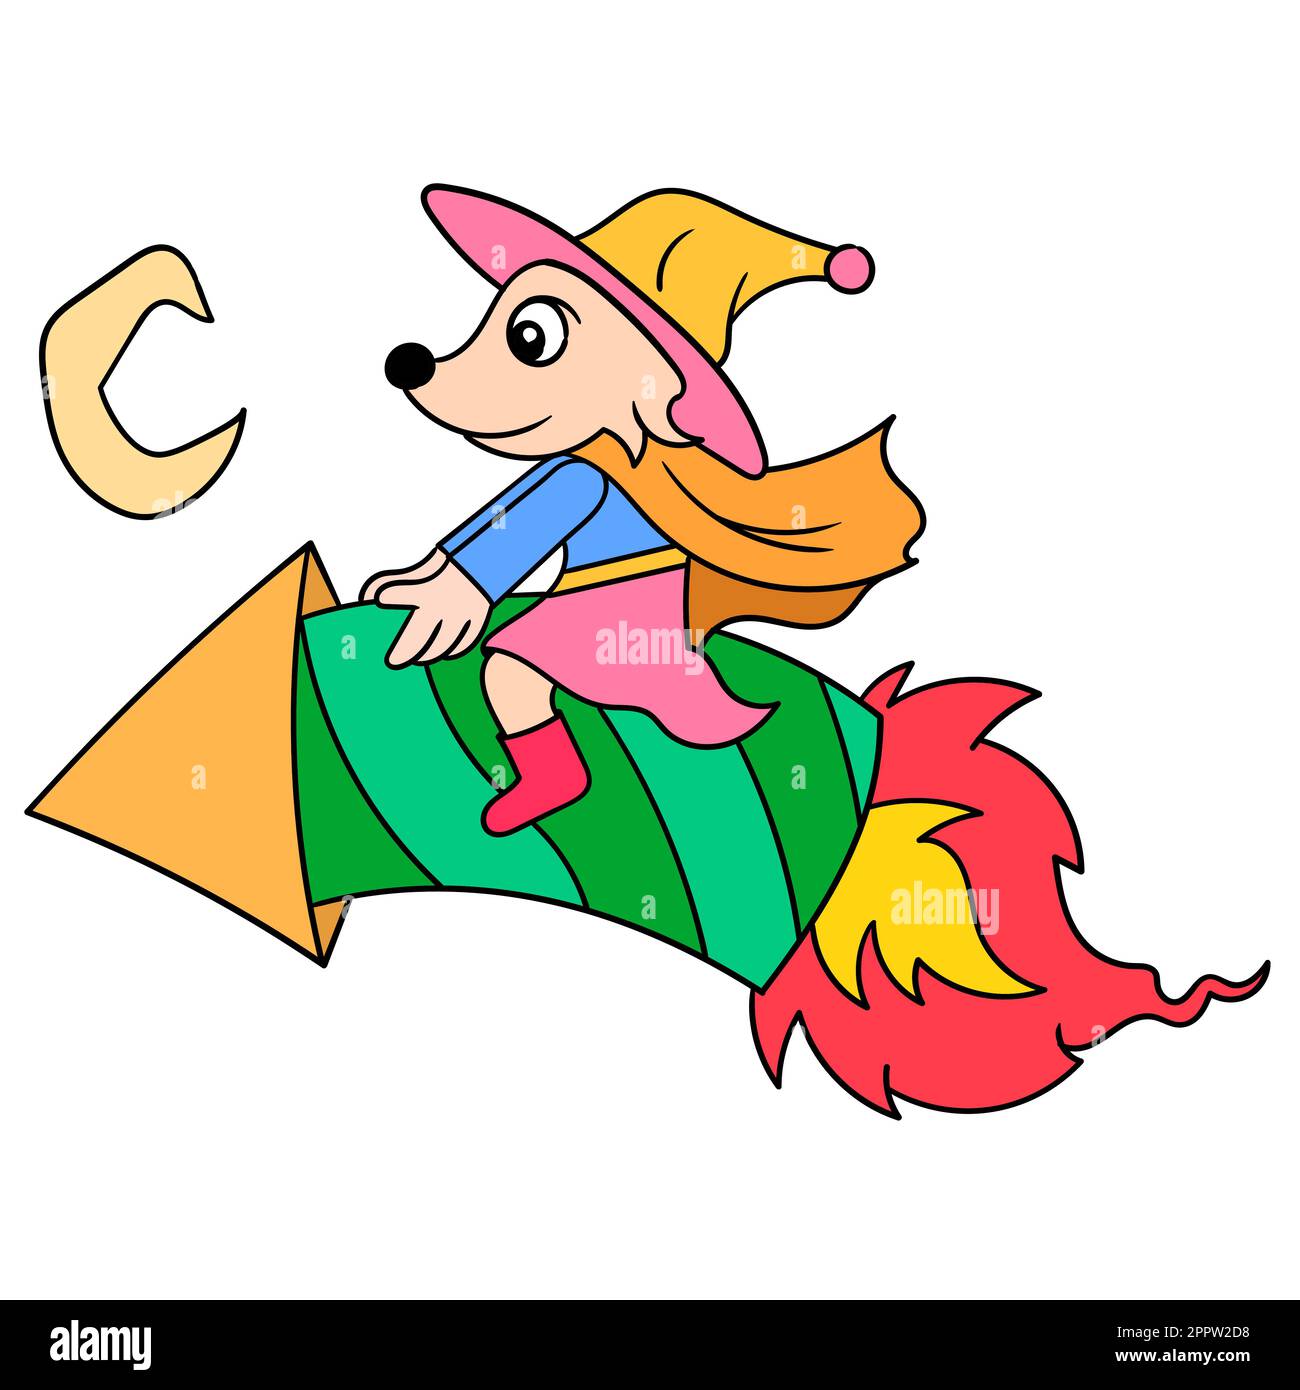 The cute fox witch flies in the sky riding a rocket at night, doodle icon image kawaii Stock Vector